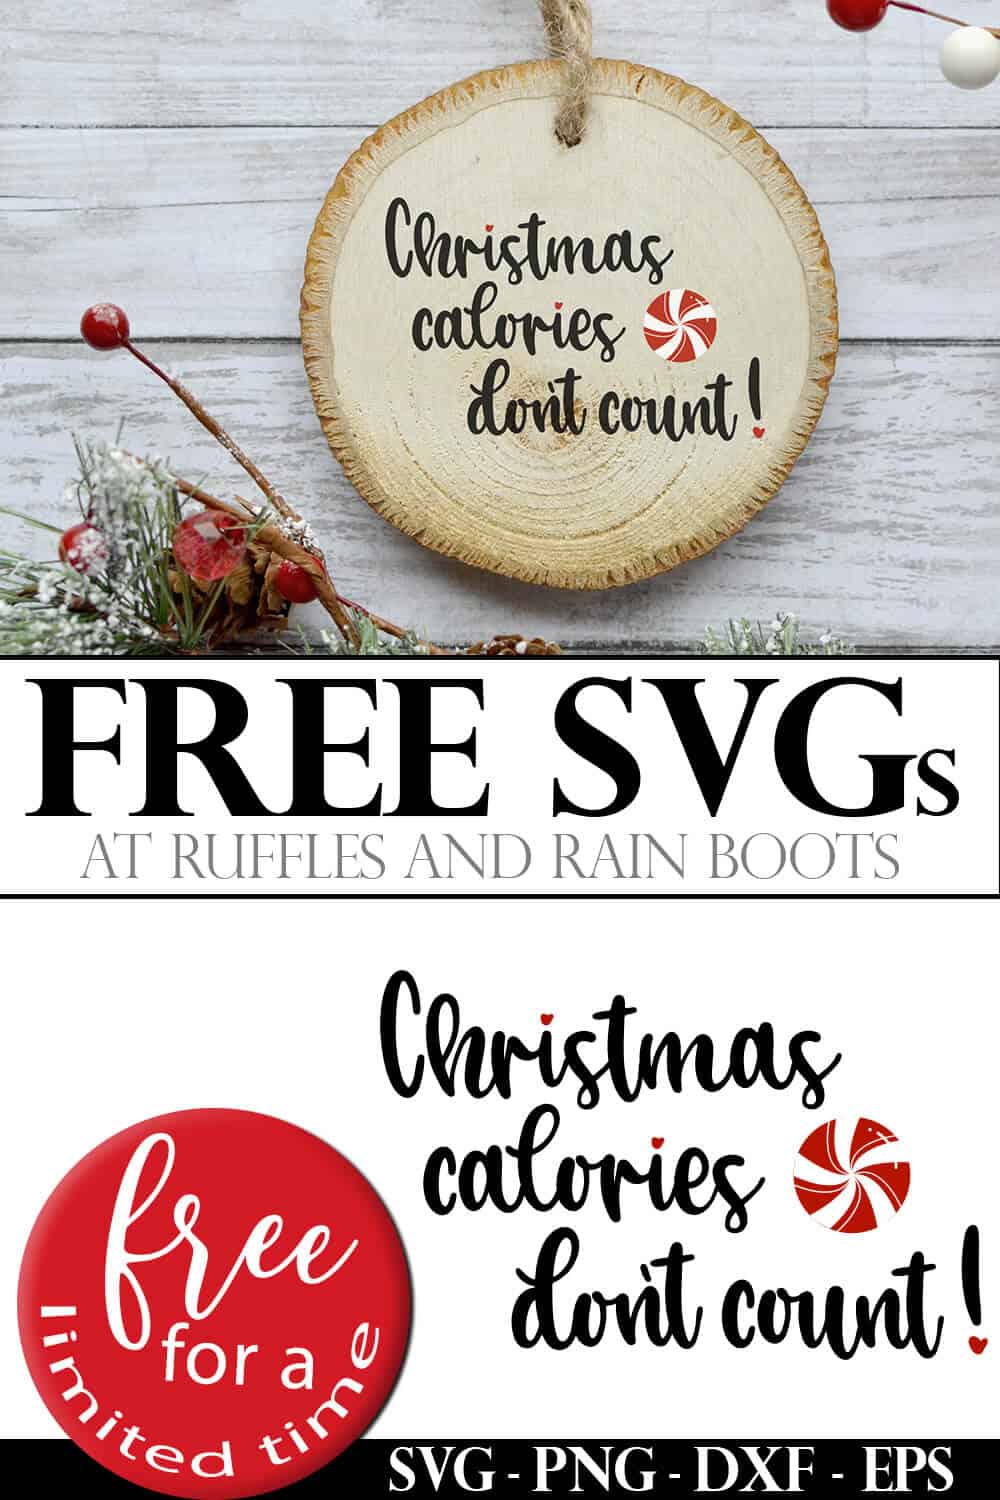 photo collage of funny free Christmas SVG with christmas calories don't count saying with text which reads free svgs free for a limited time